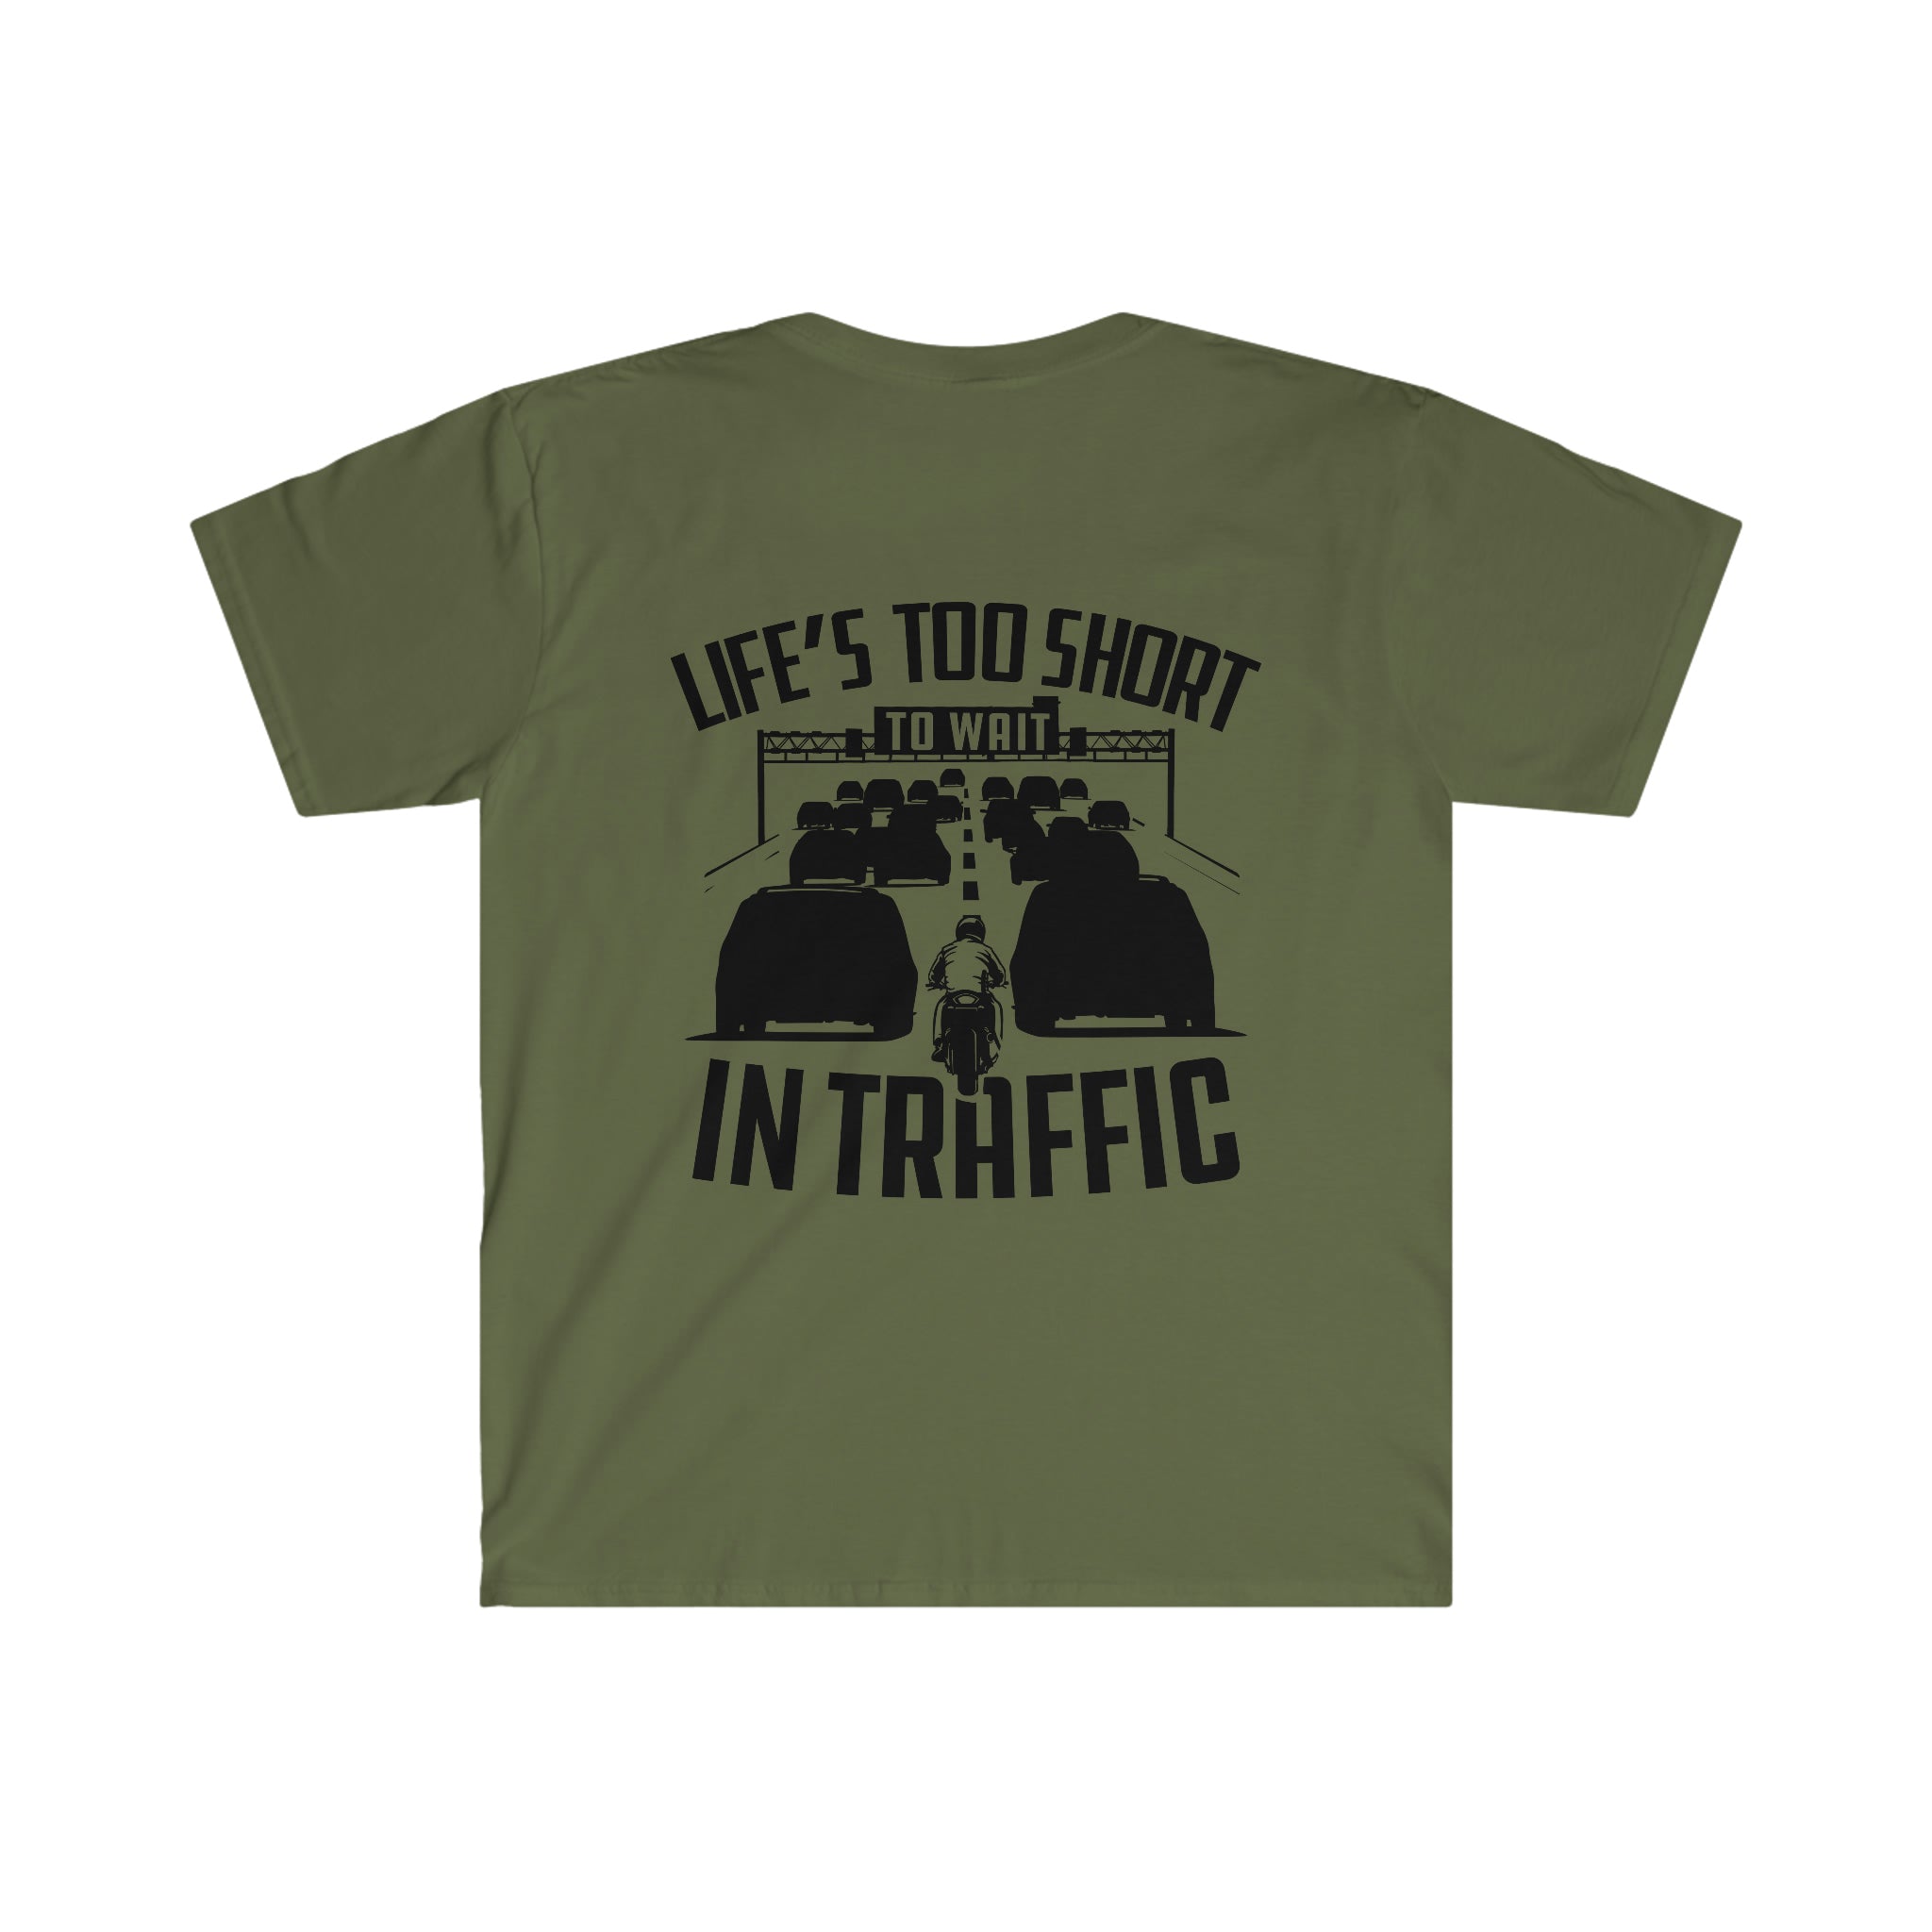 Life's Too Short to Wait in Traffic Tee Shirt – Carbon Moto Gear